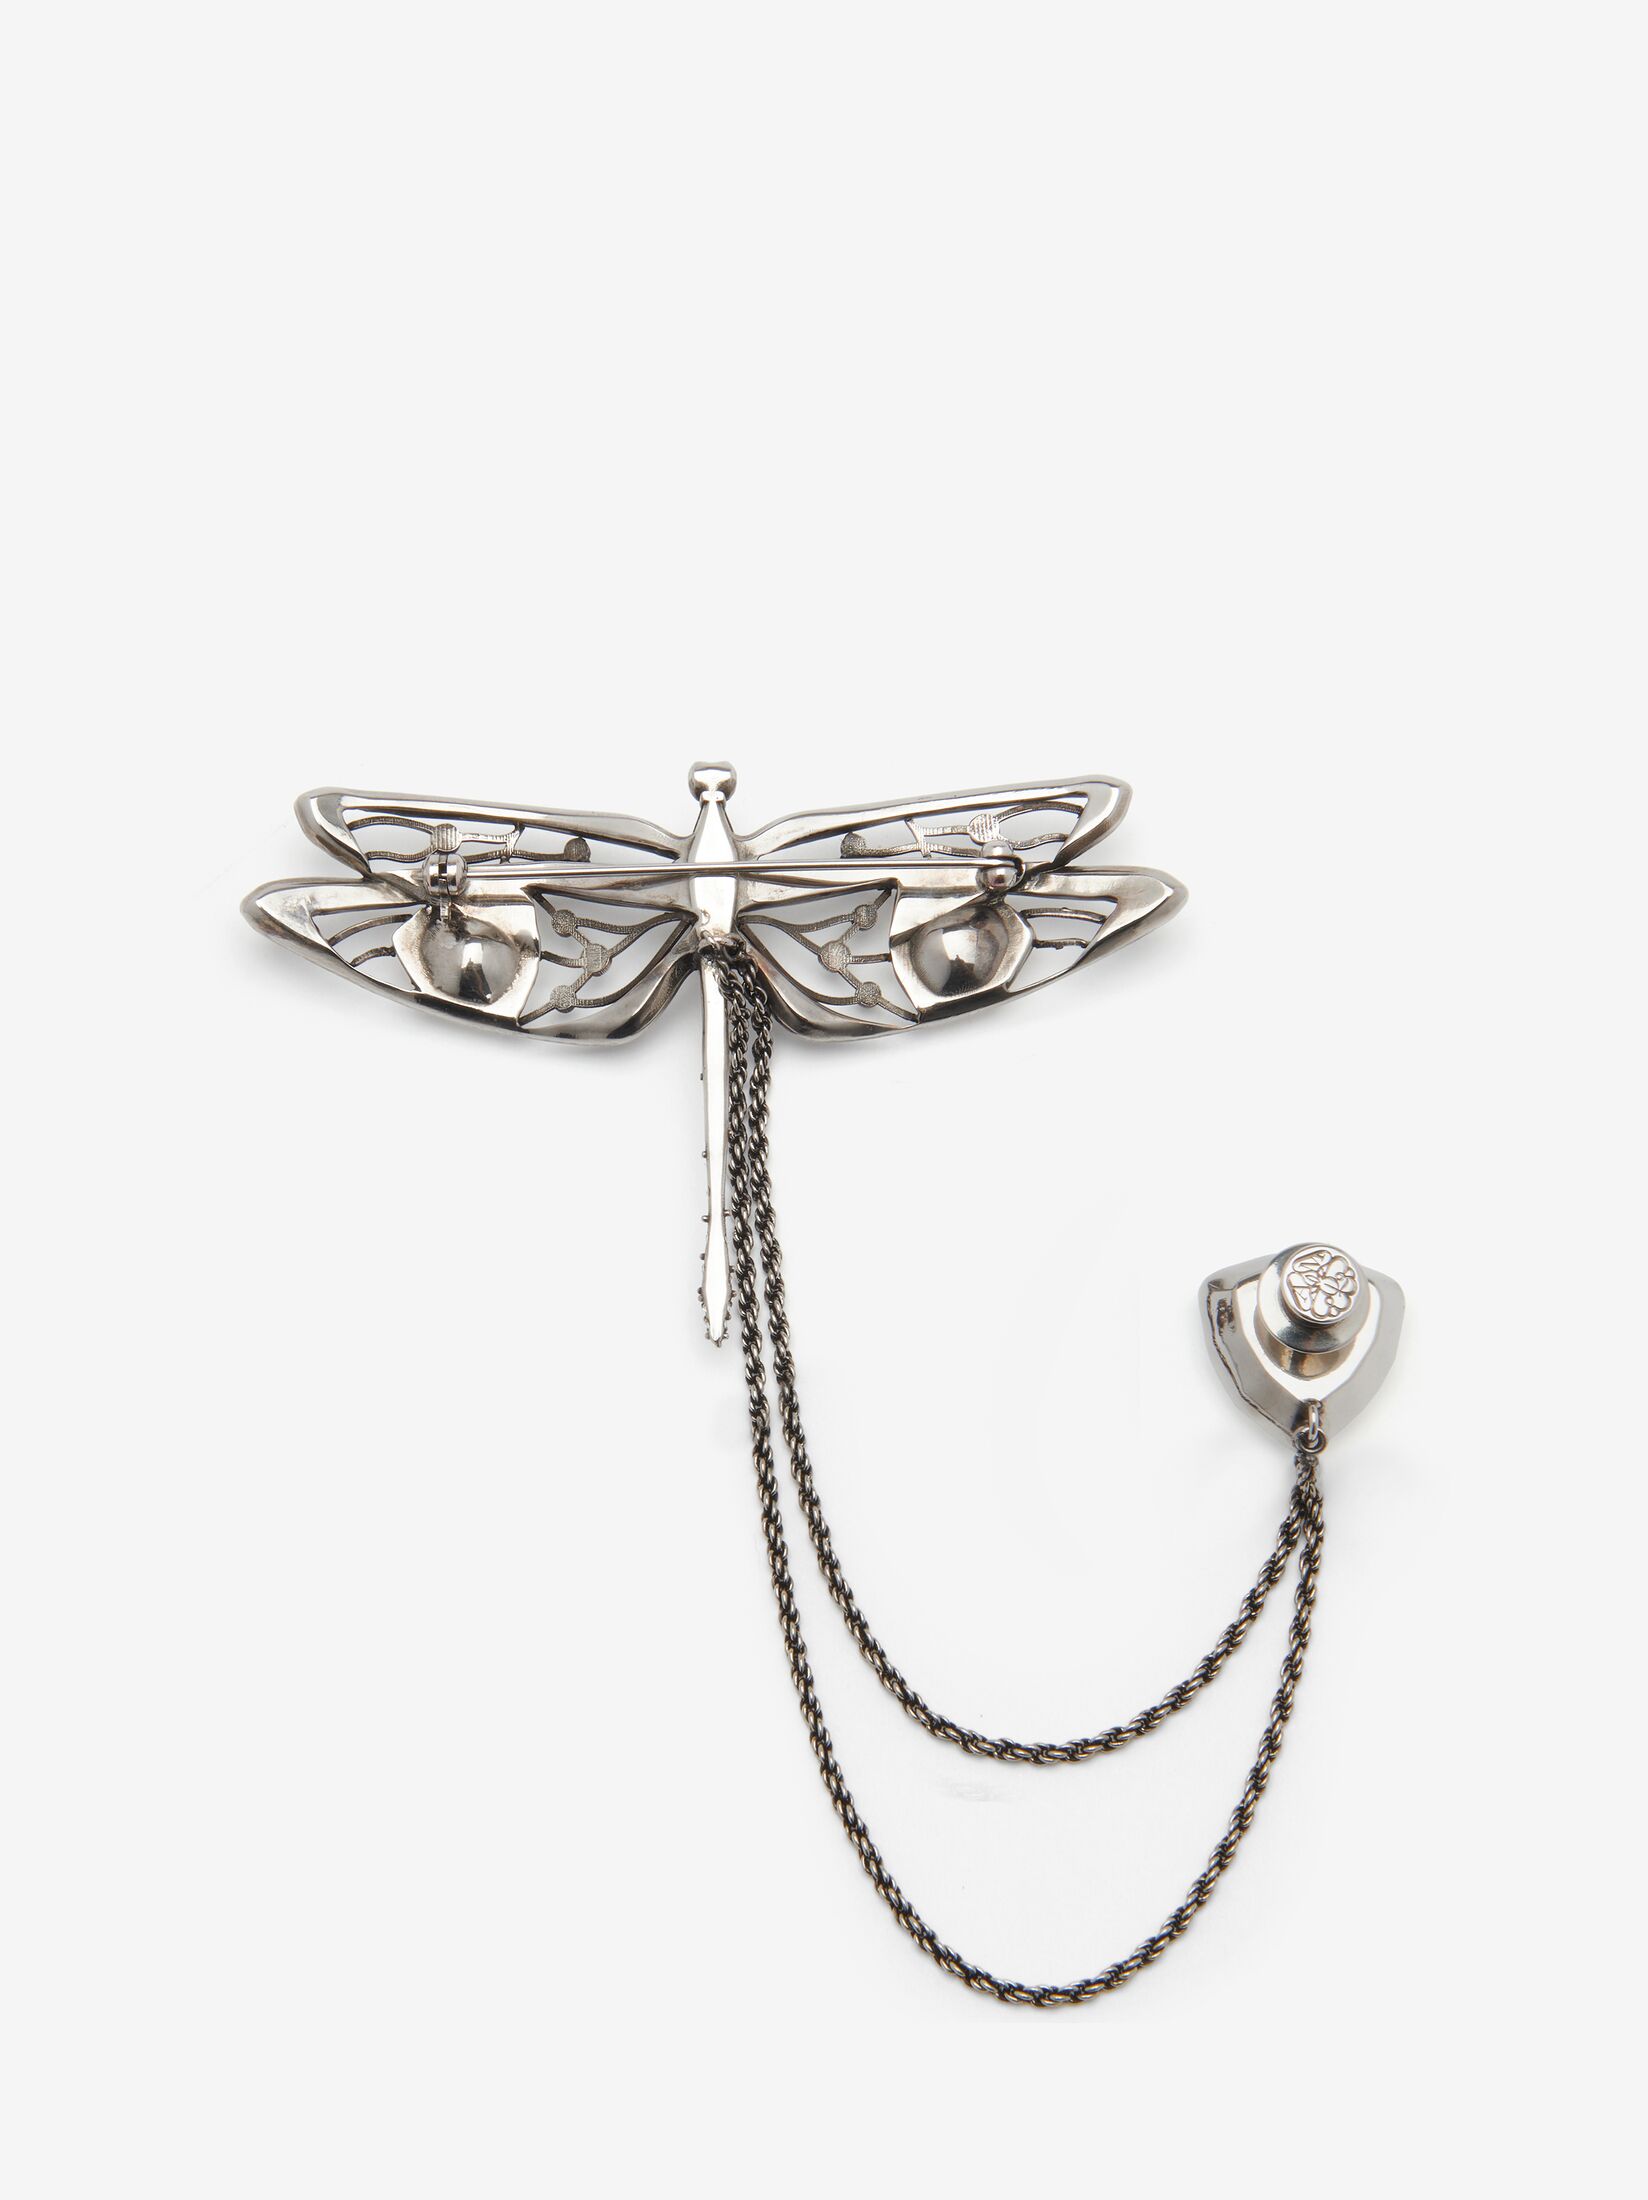 Dragonfly Double Pin Brooch